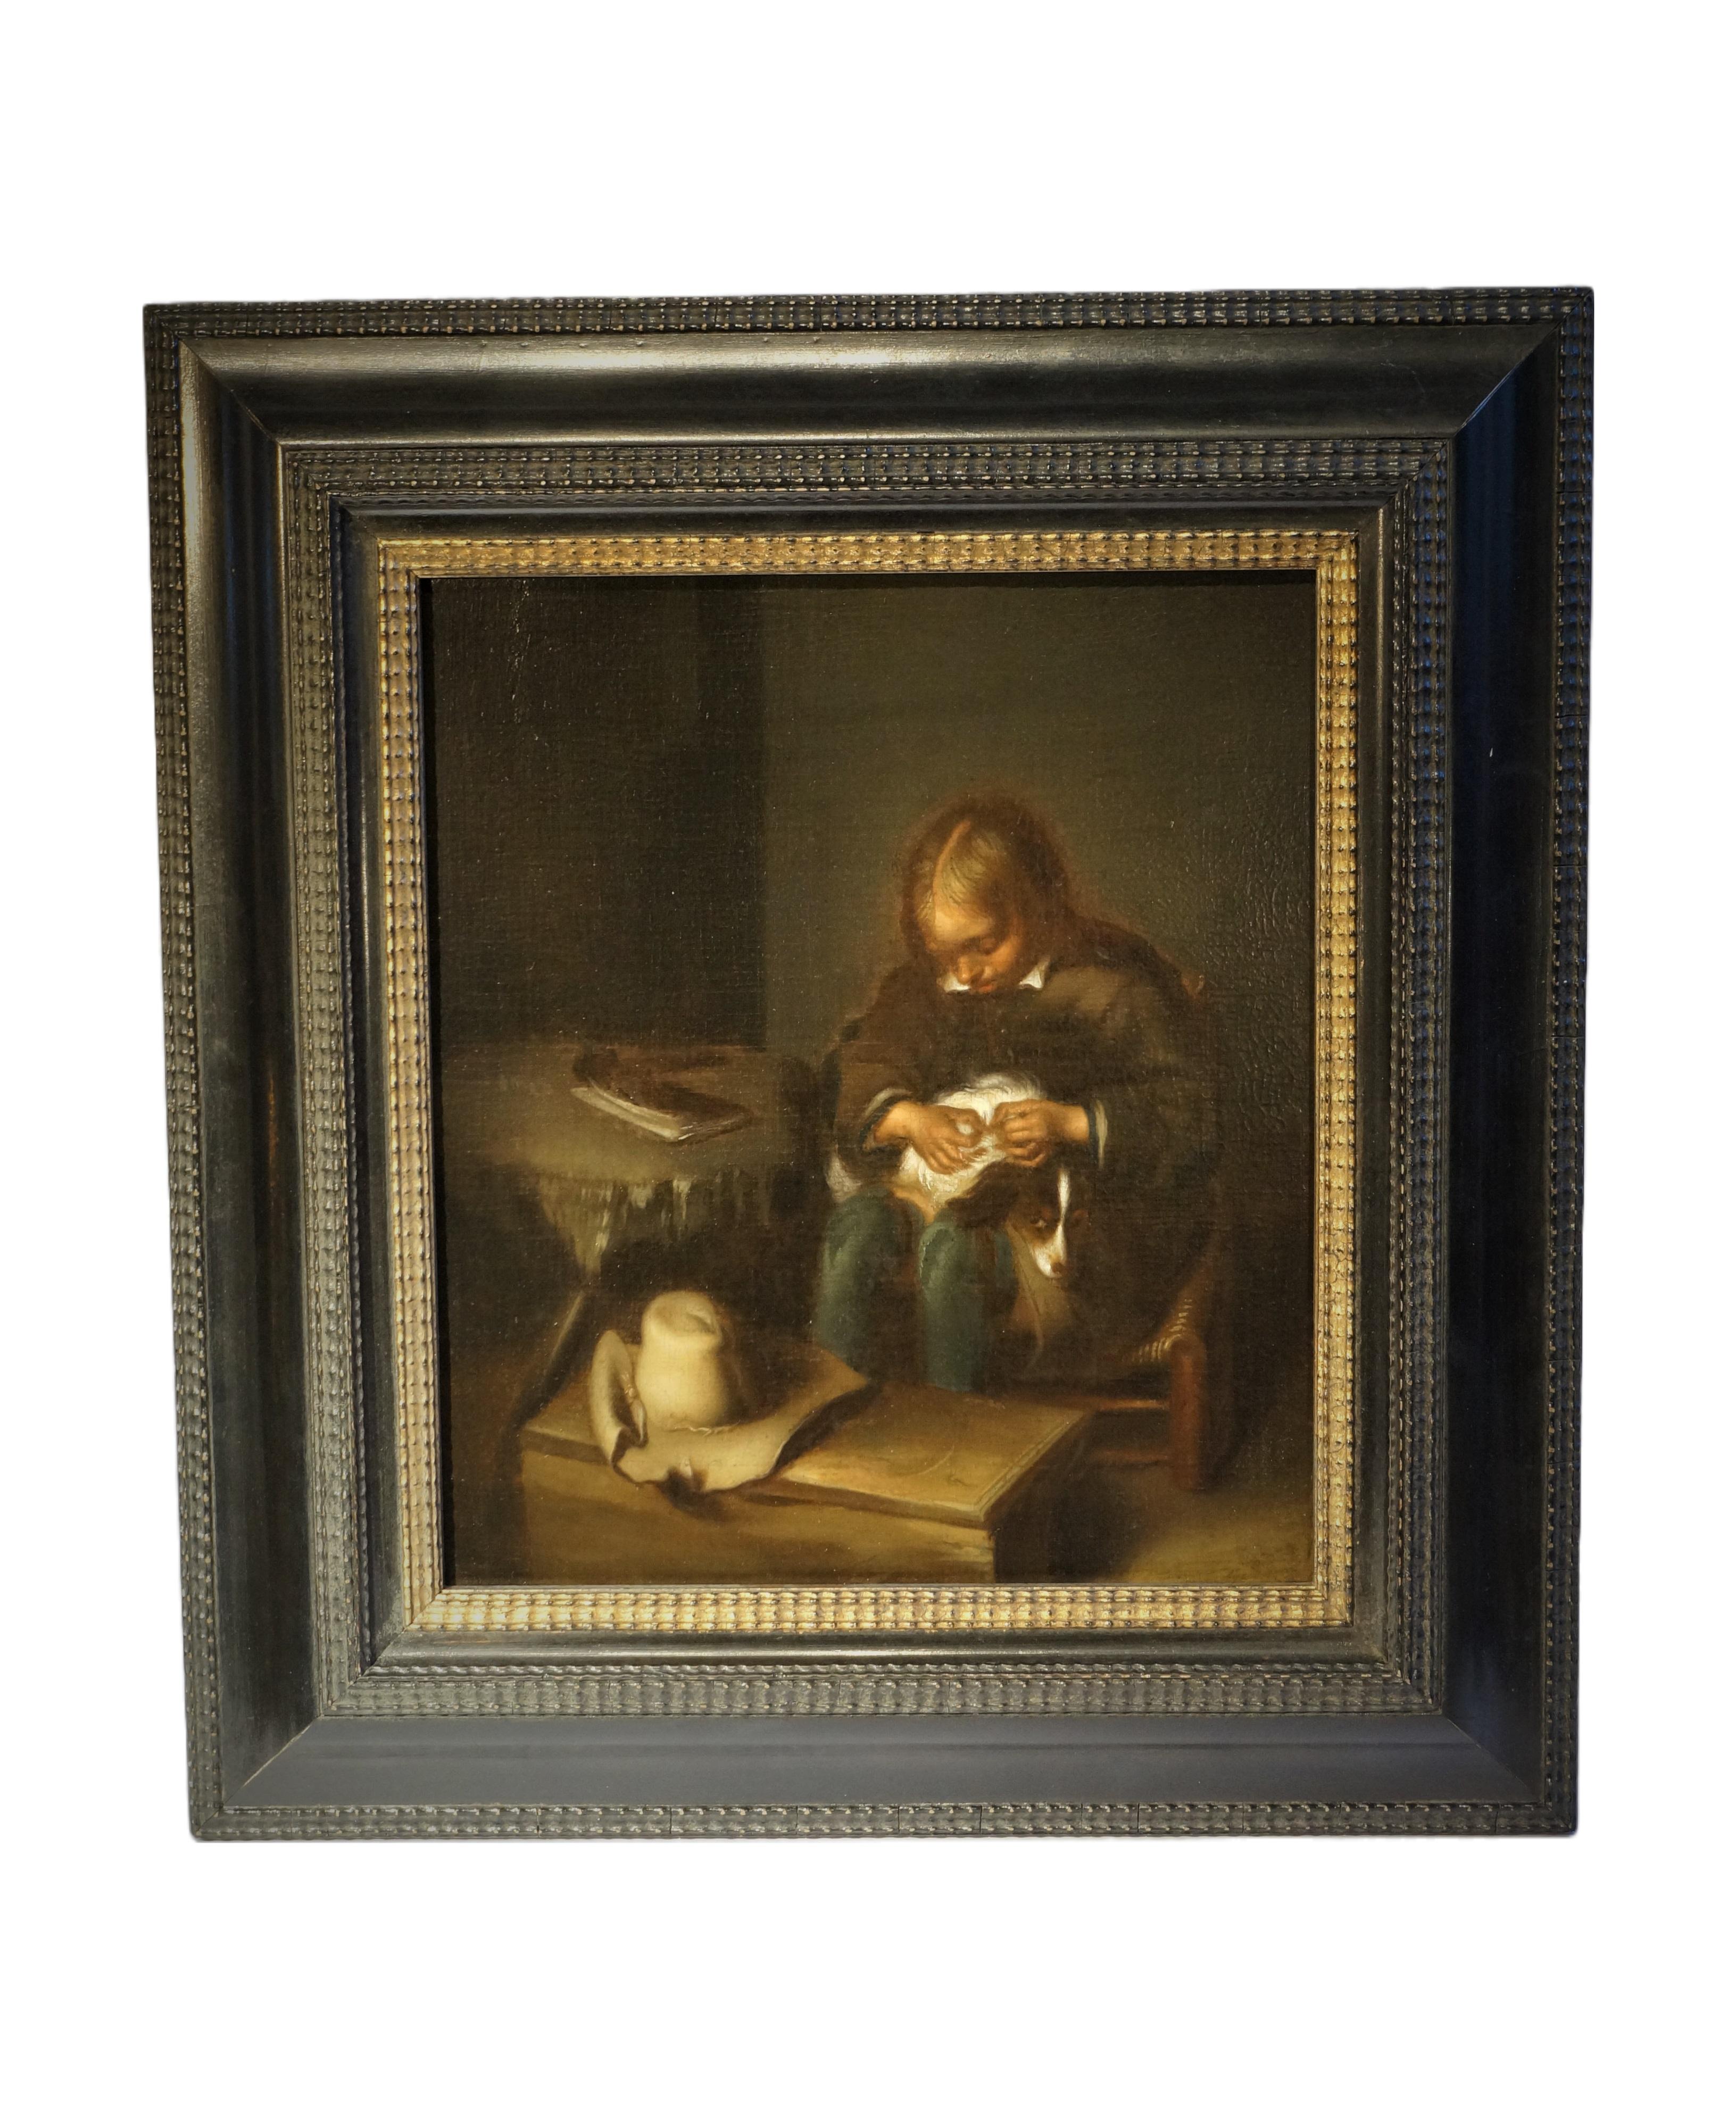 Antique oil painting, Boy Fleaing a Dog, Gerard ter Borch, Dutch golden age - Painting by Gerard ter Borch (II)